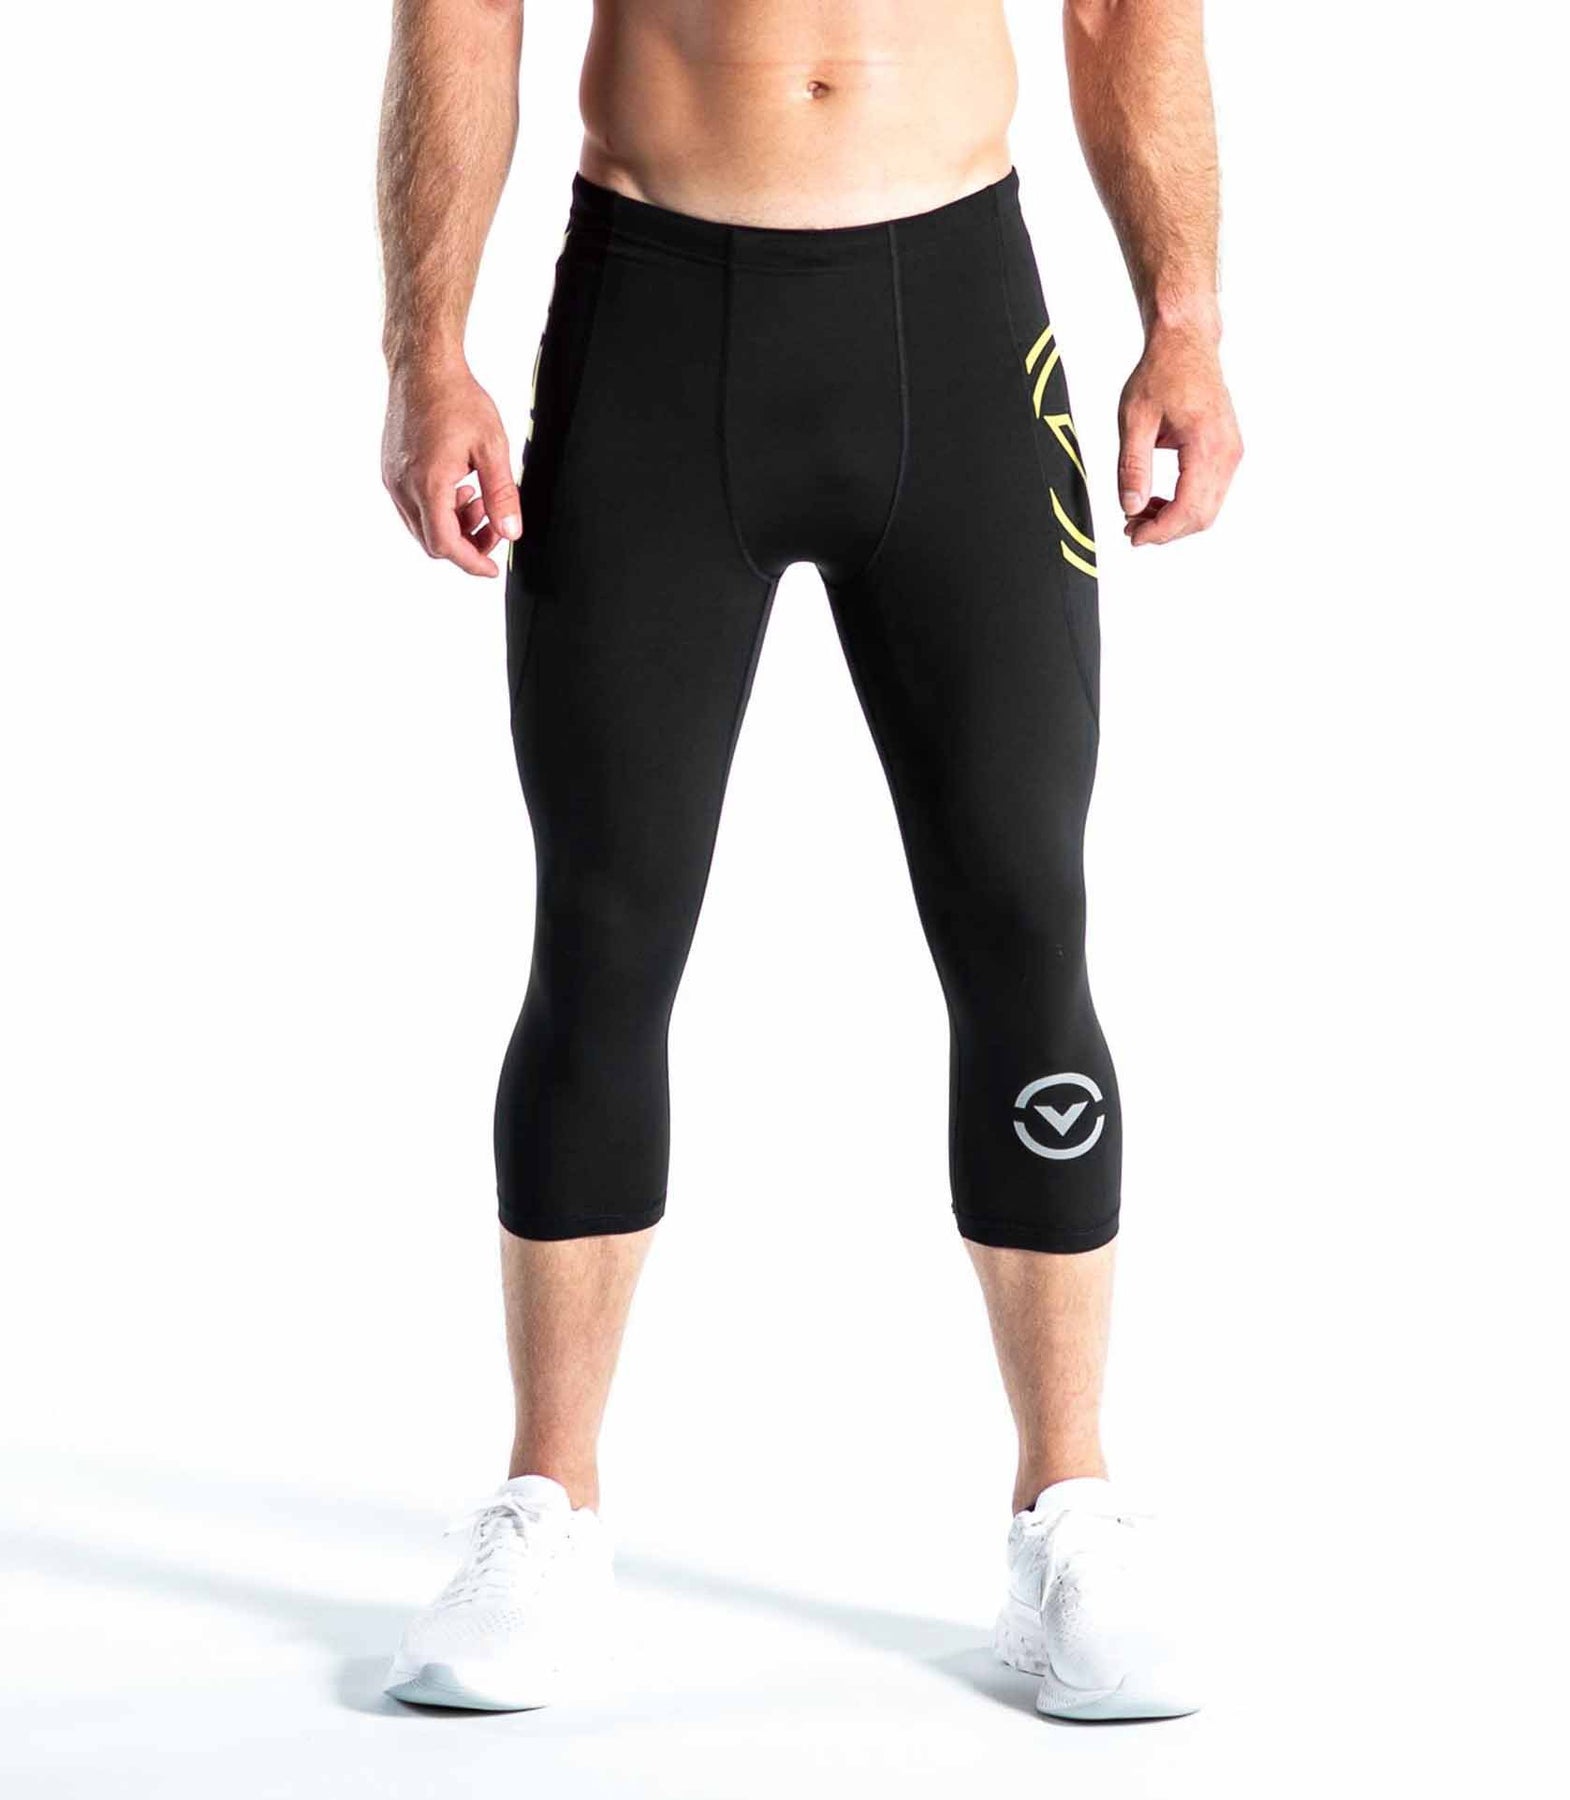 VIRUS Chrome and Red Compression Pants and Shorts